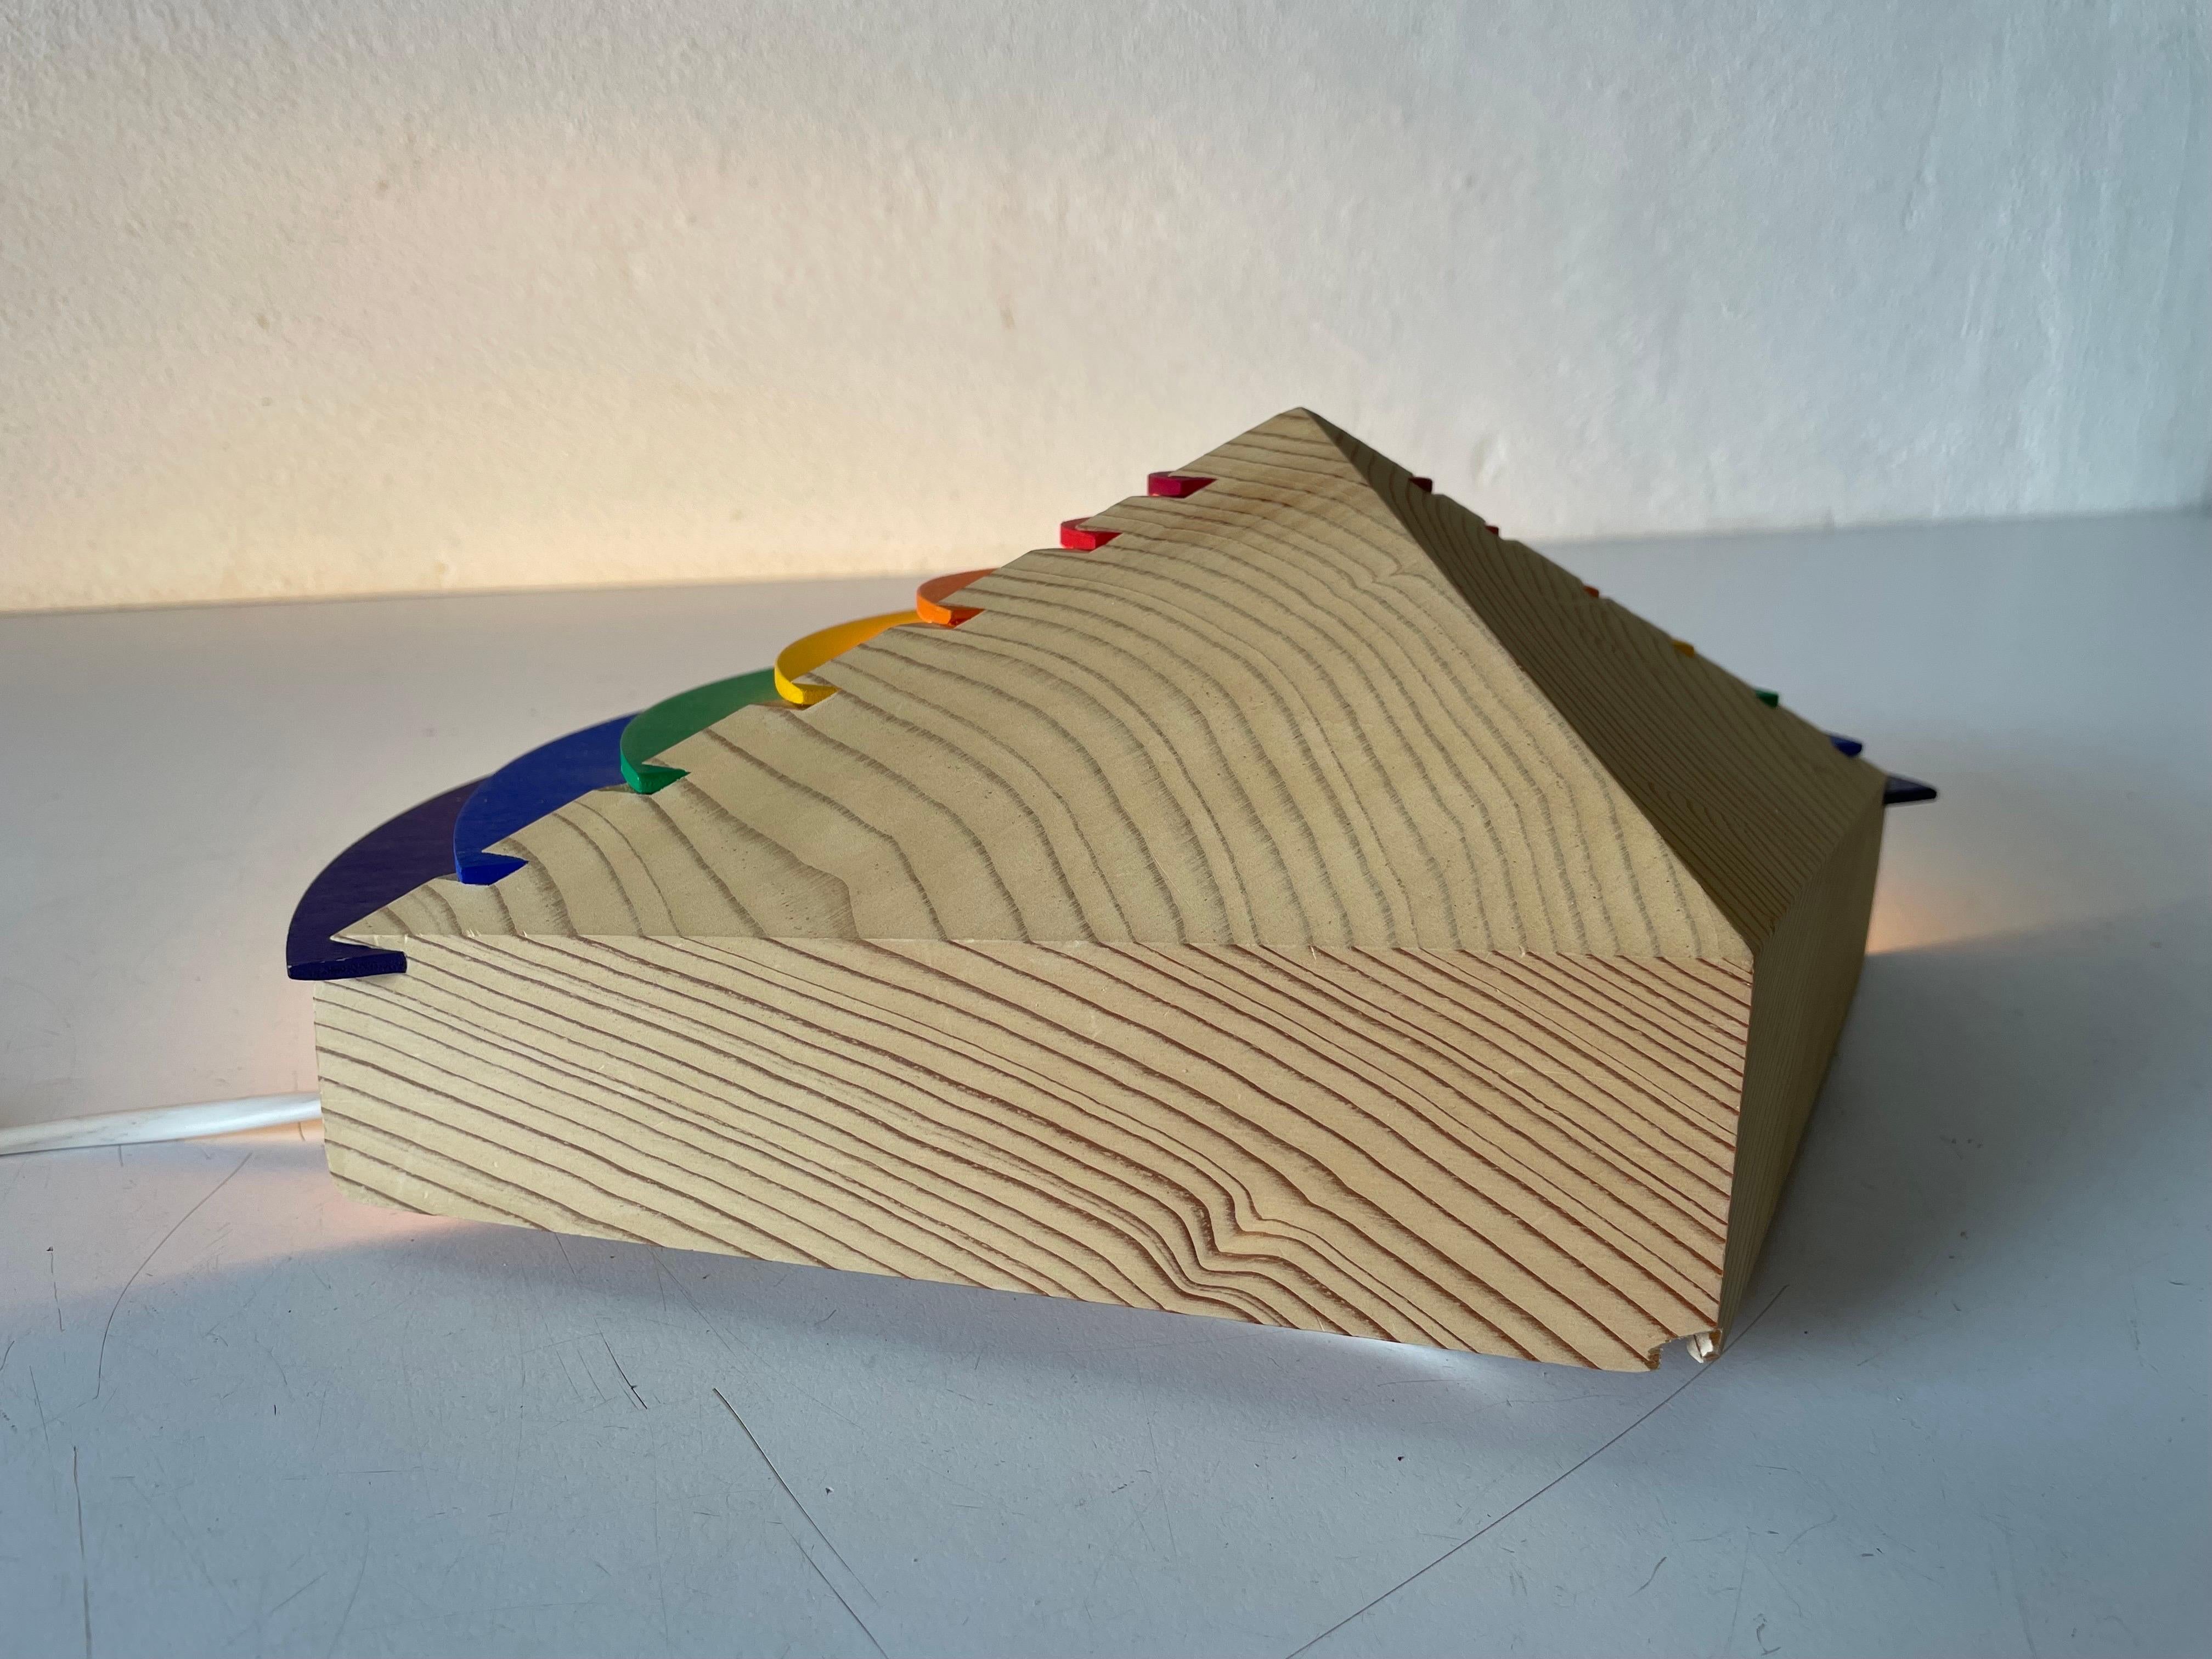 Rainbow design Wood Night Lamp by Kiener Zürich, in Style of Memphis Group, 1980 For Sale 4